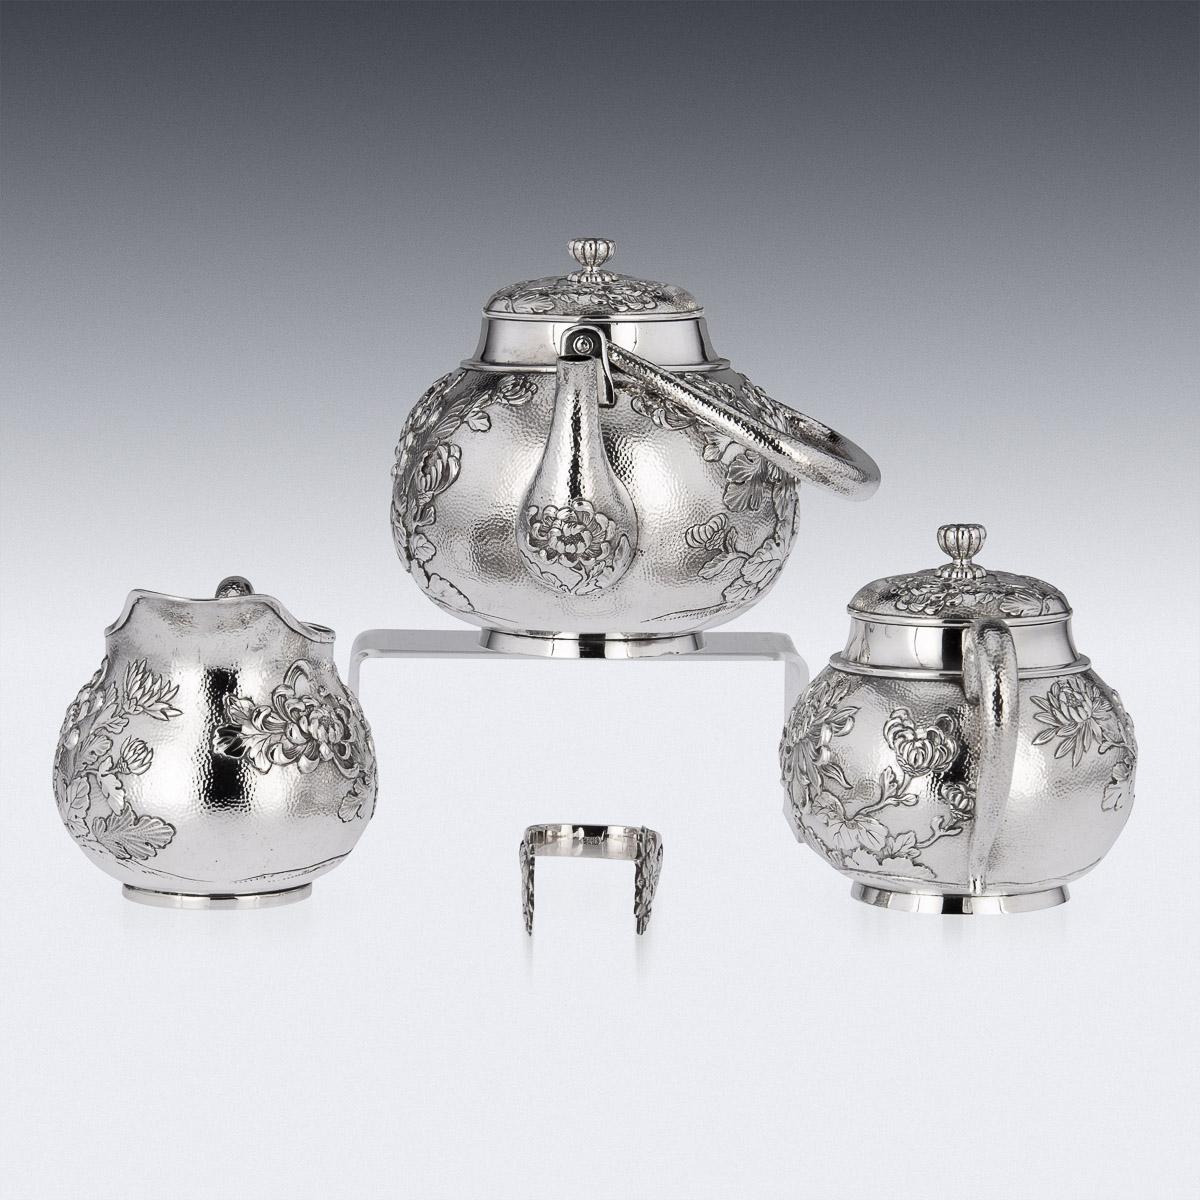 20th Century Japanese silver four piece tea set, consisting of a teapot, sugar bowl, lidded cream jug and sugar tongs, exceptional quality, double walled, embossed with with chrysanthemums and foliage in high relief on matted ground, C-form handles,